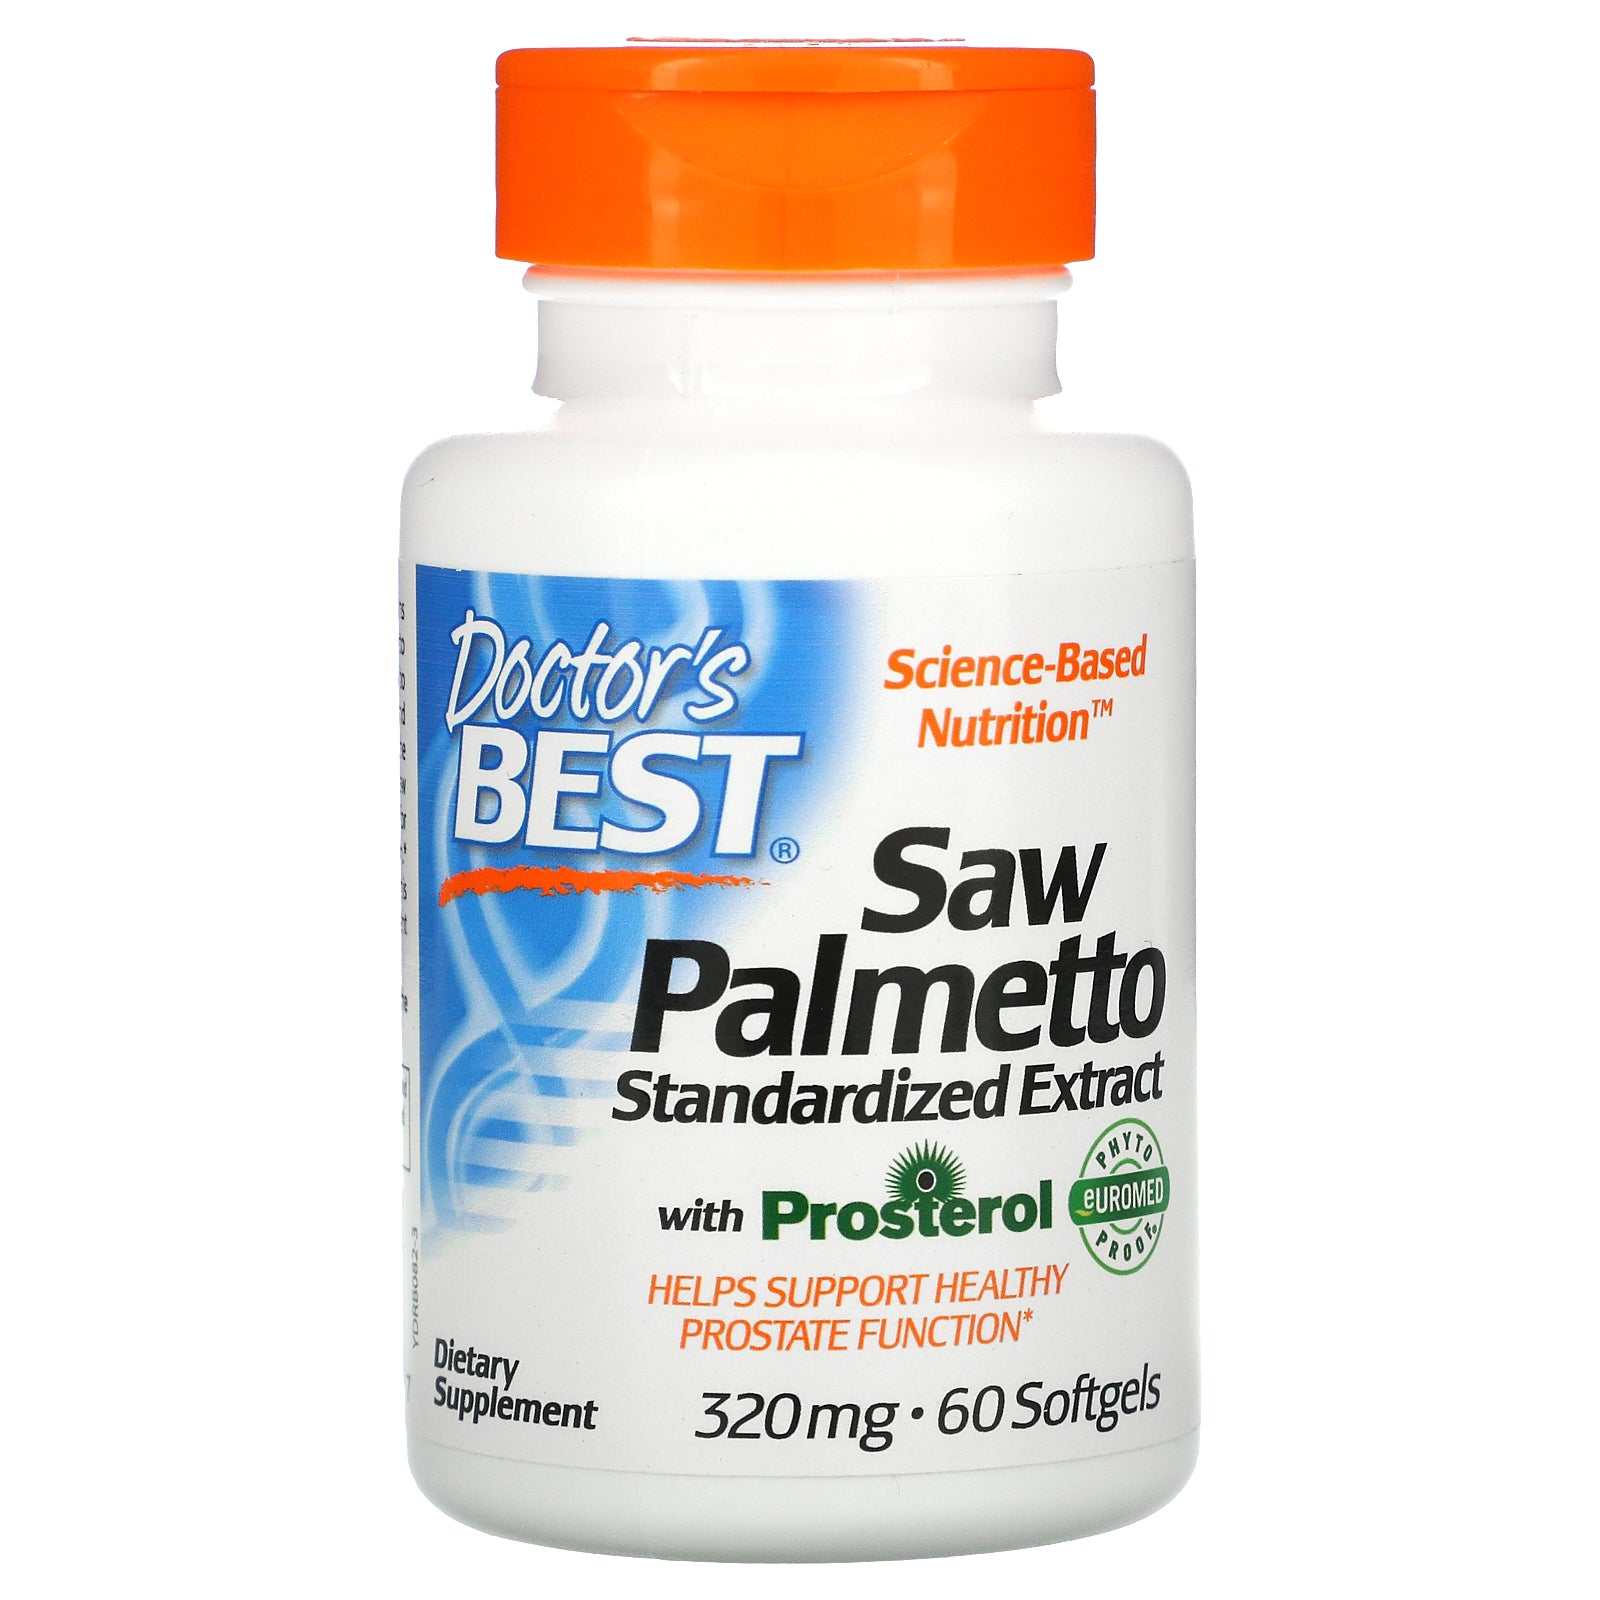 Doctor's Best, Saw Palmetto, Standardized Extract with Prosterol, 320 mg, 60 Softgels